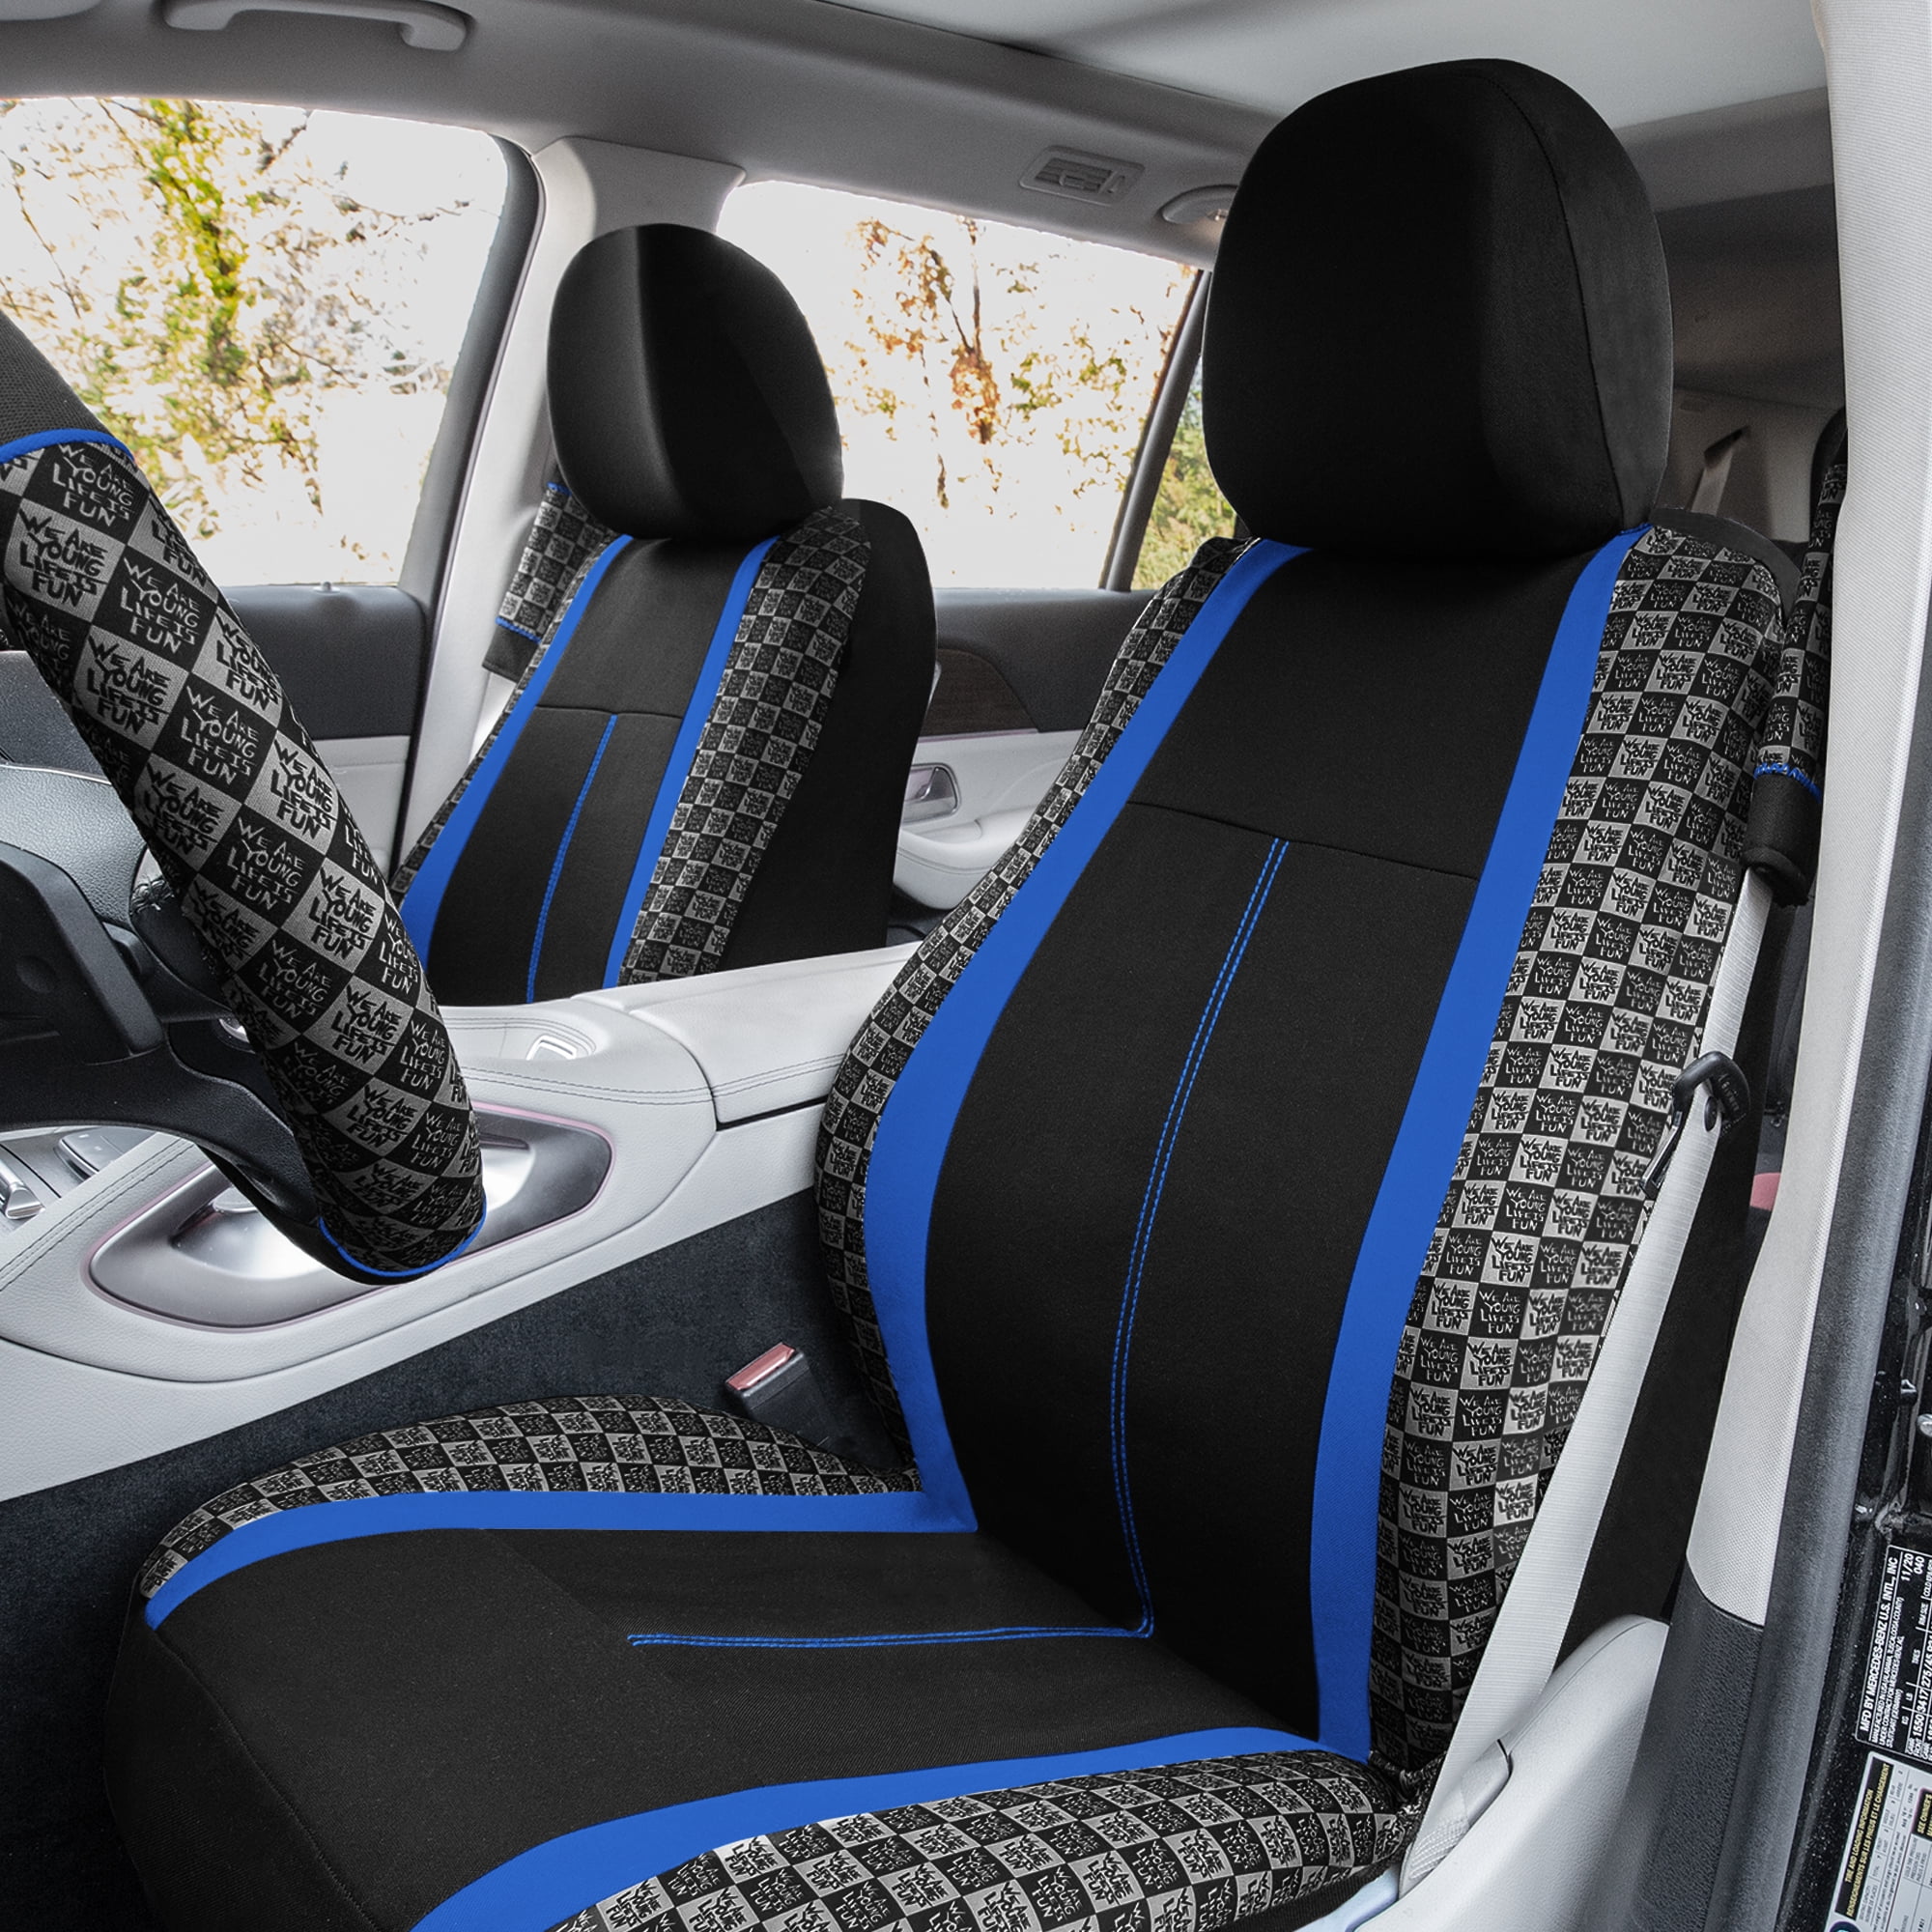 Car Seat Covers for sale in Cologne, Germany